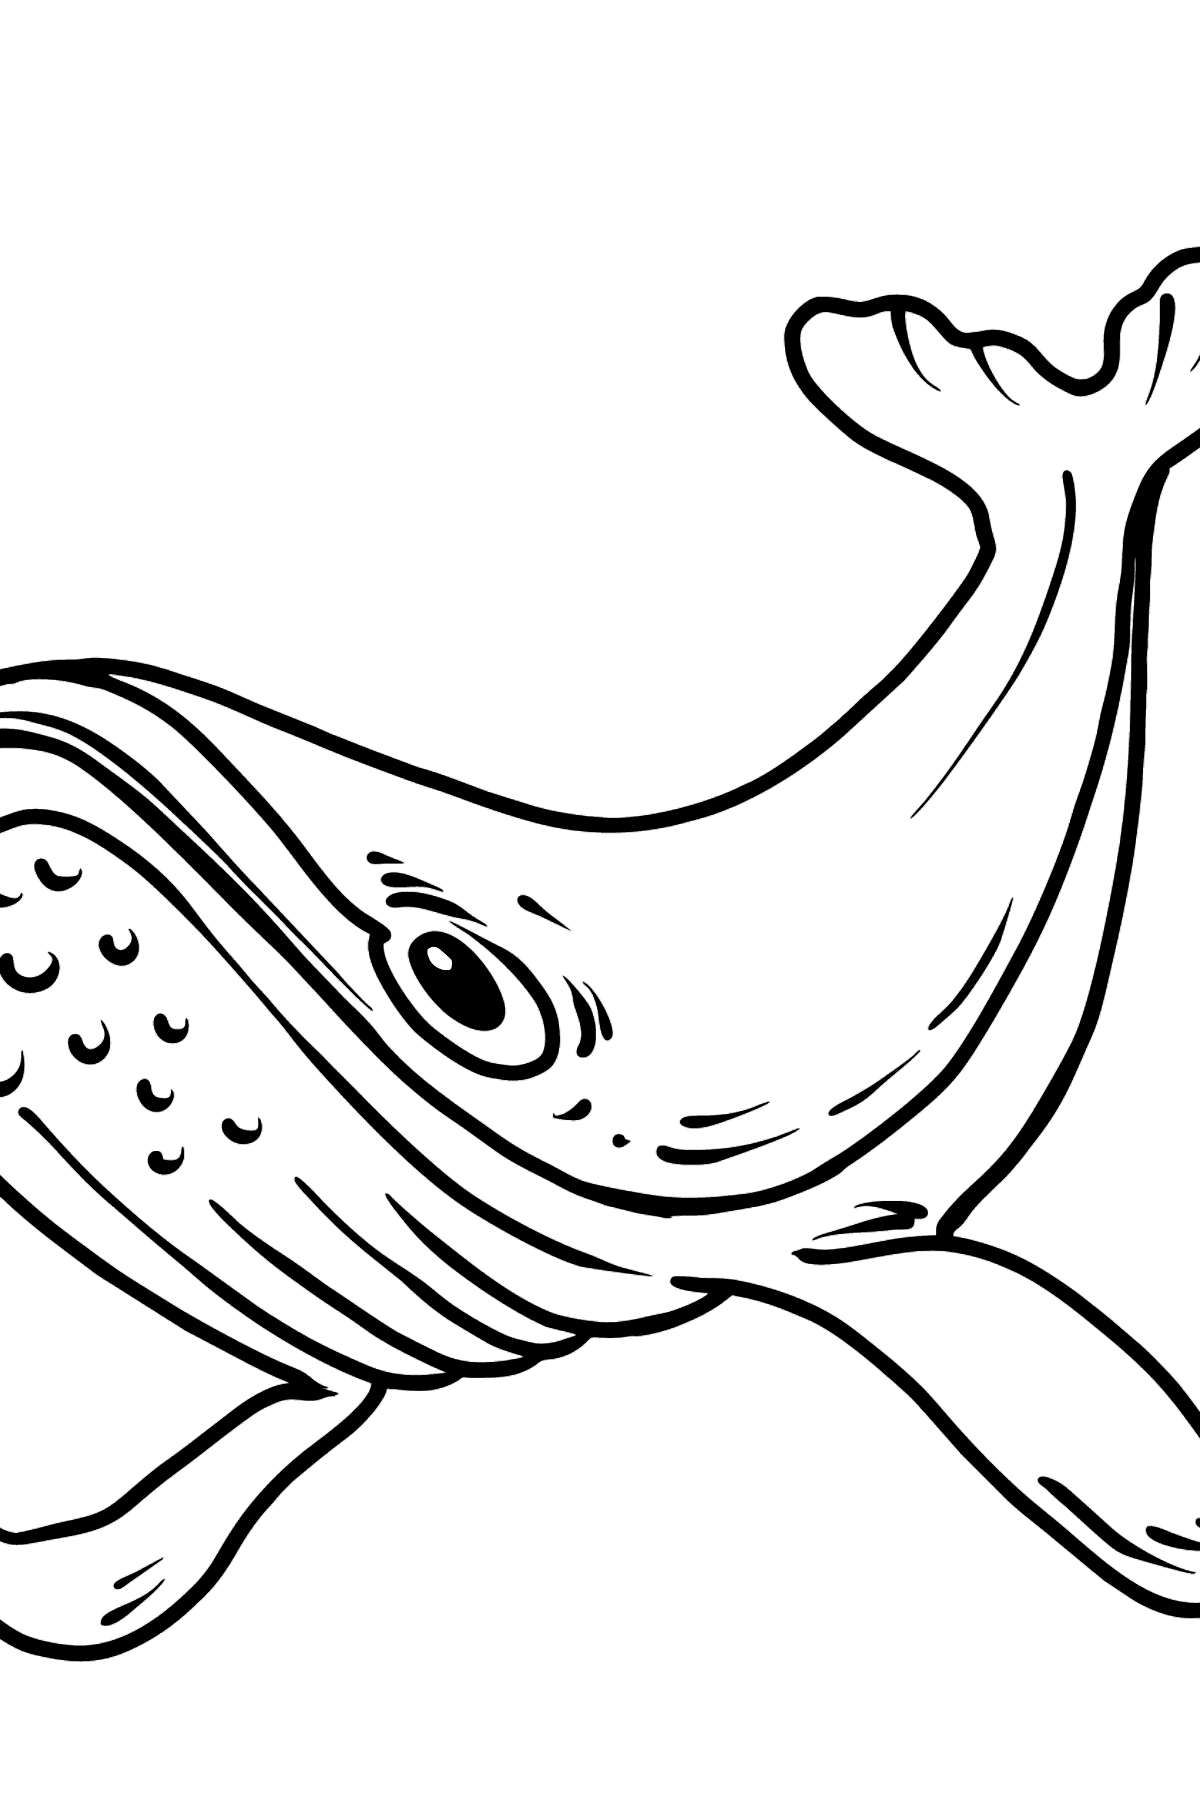 Whale coloring page - Coloring Pages for Kids